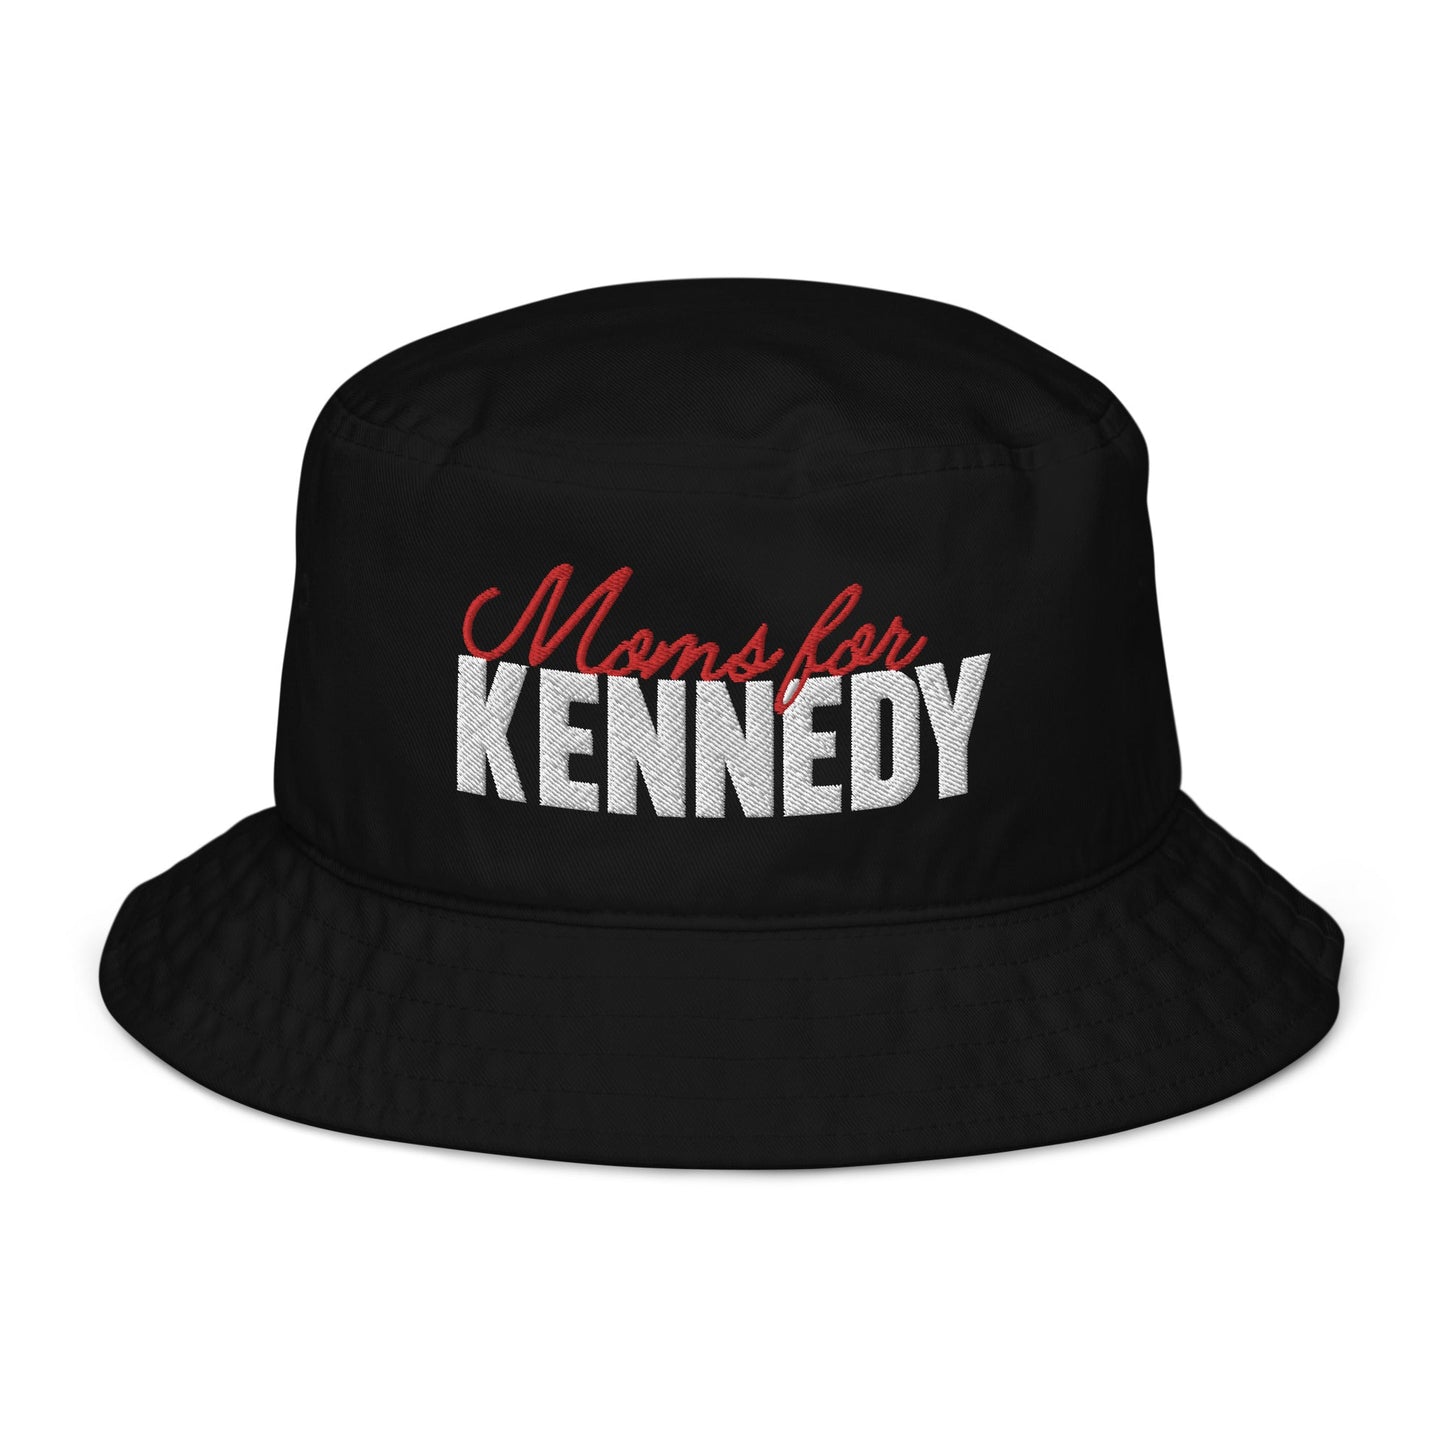 Moms for Kennedy Organic Bucket Hat - TEAM KENNEDY. All rights reserved